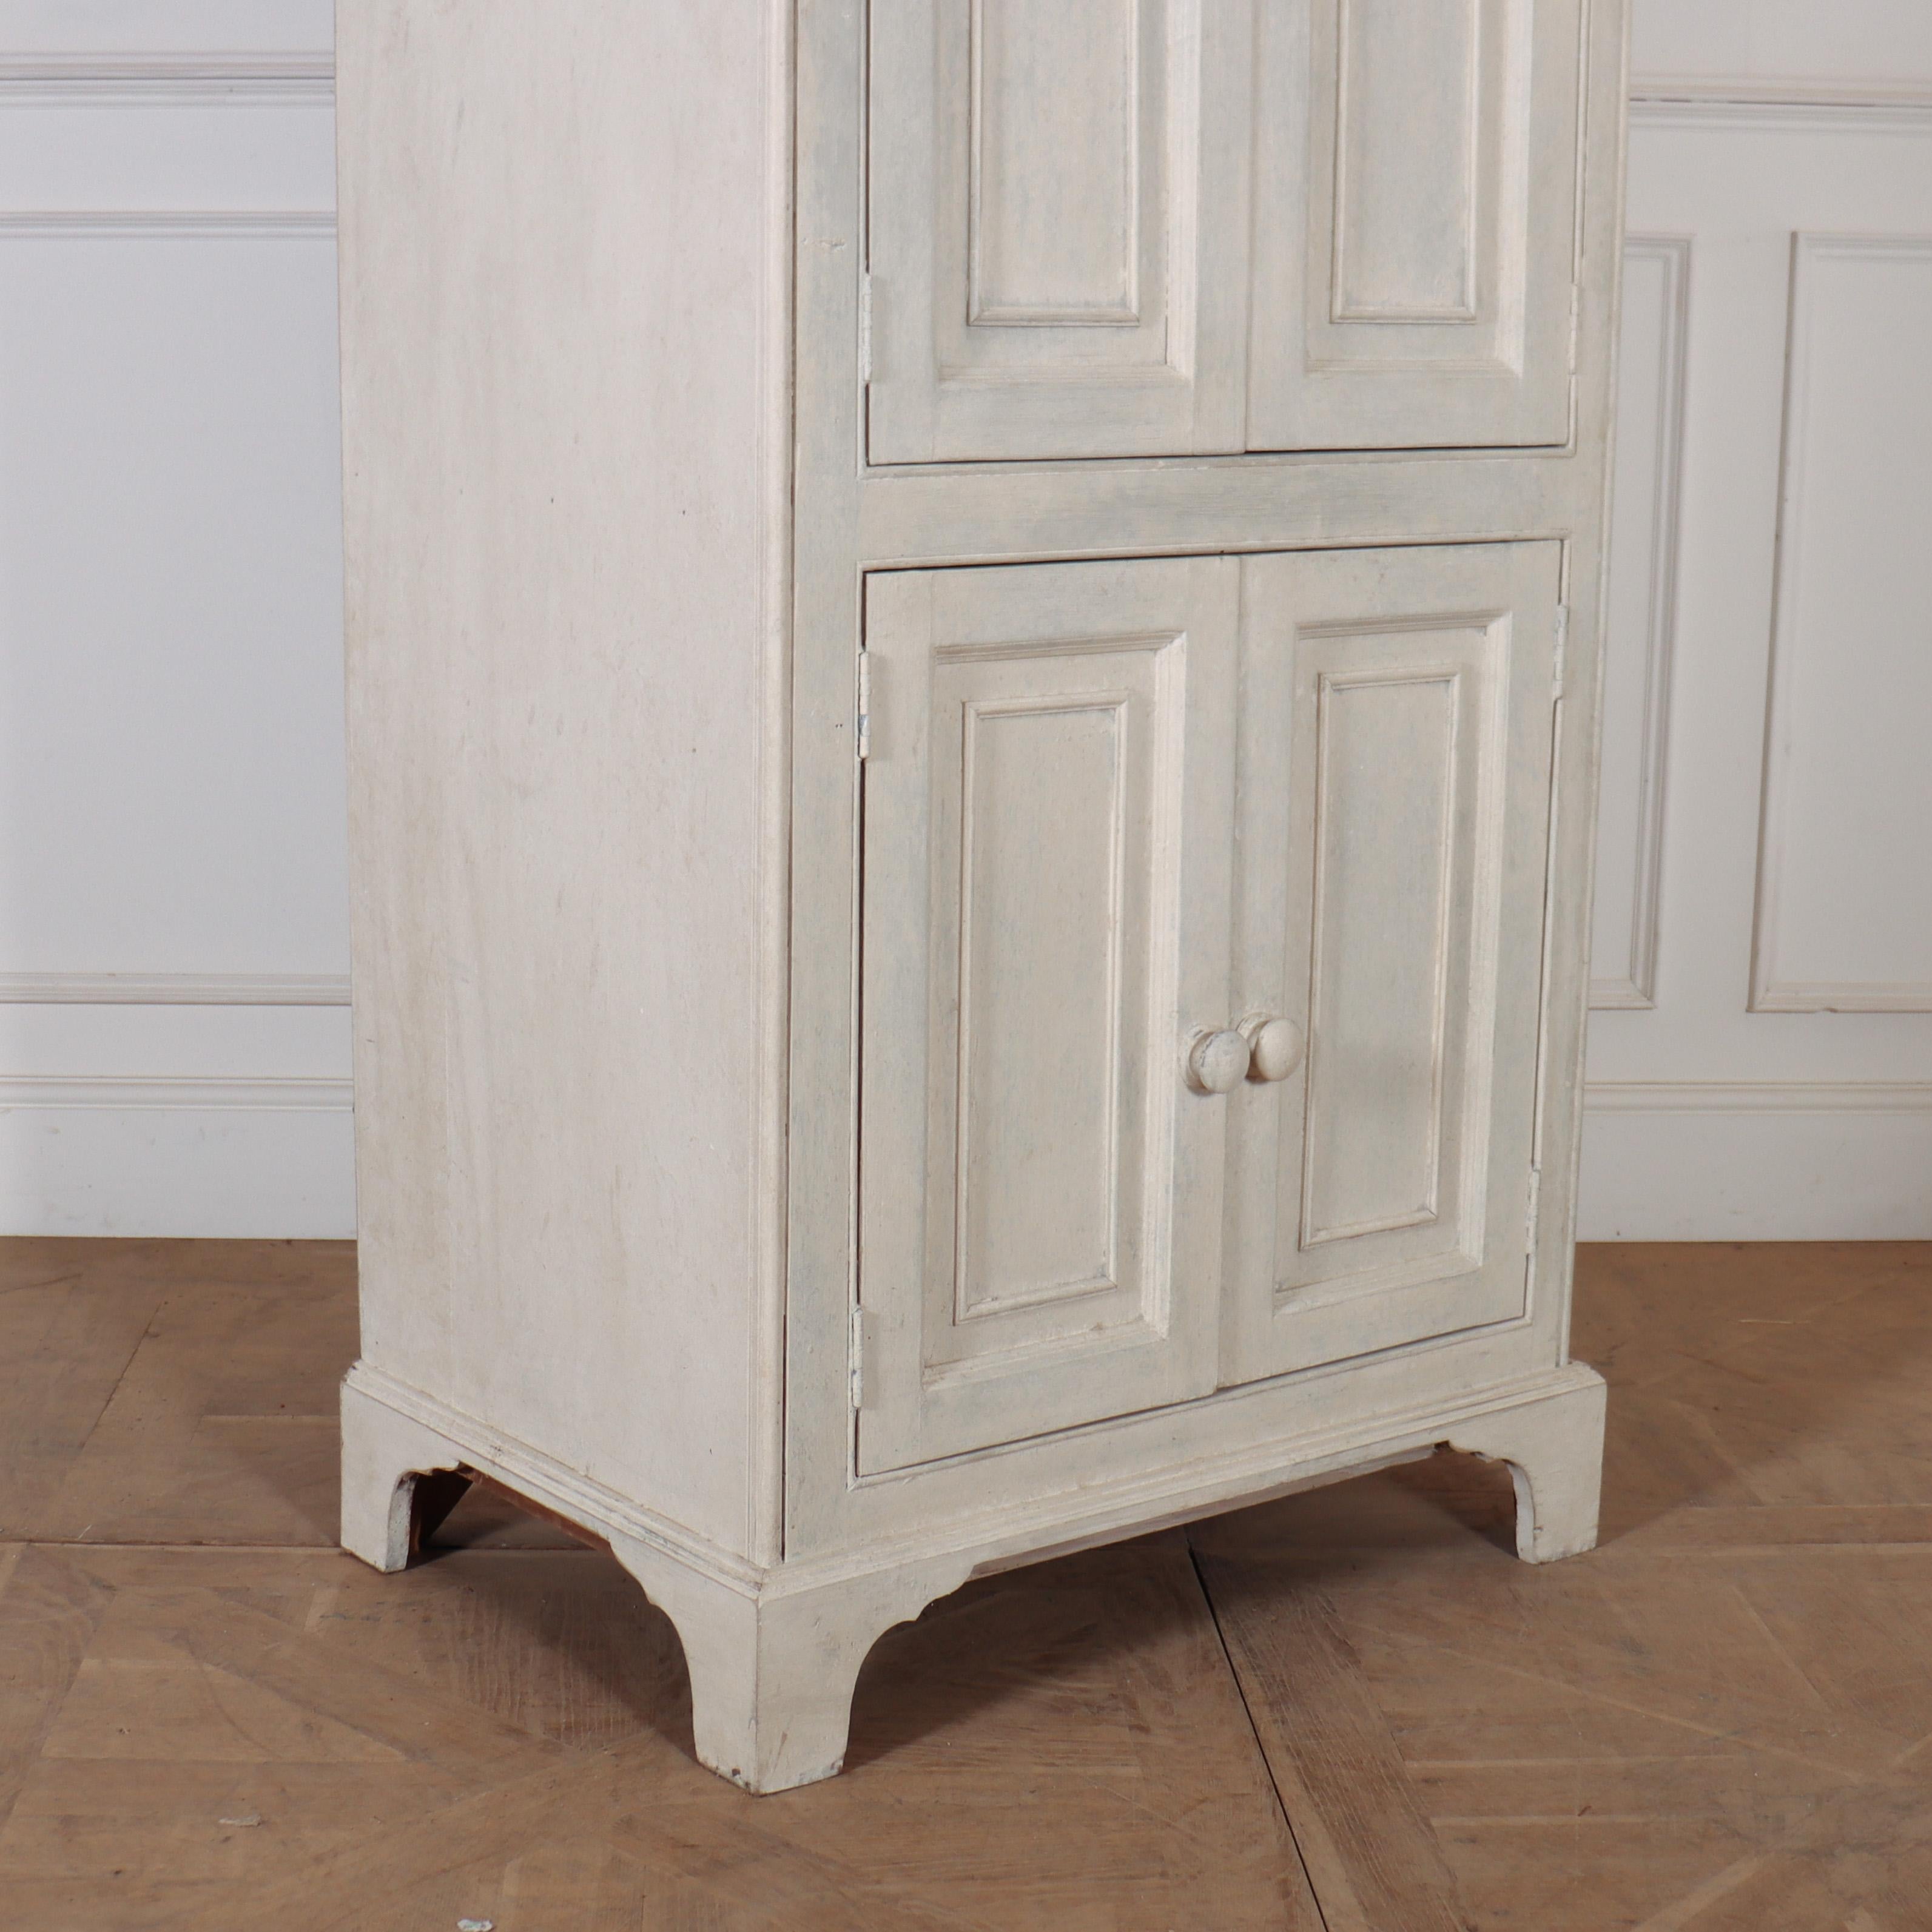 19th C English painted pine four door shelved linen cupboard. 1890.

Reference: 7970

Dimensions
39 inches (99 cms) Wide
25.5 inches (65 cms) Deep
95.5 inches (243 cms) High